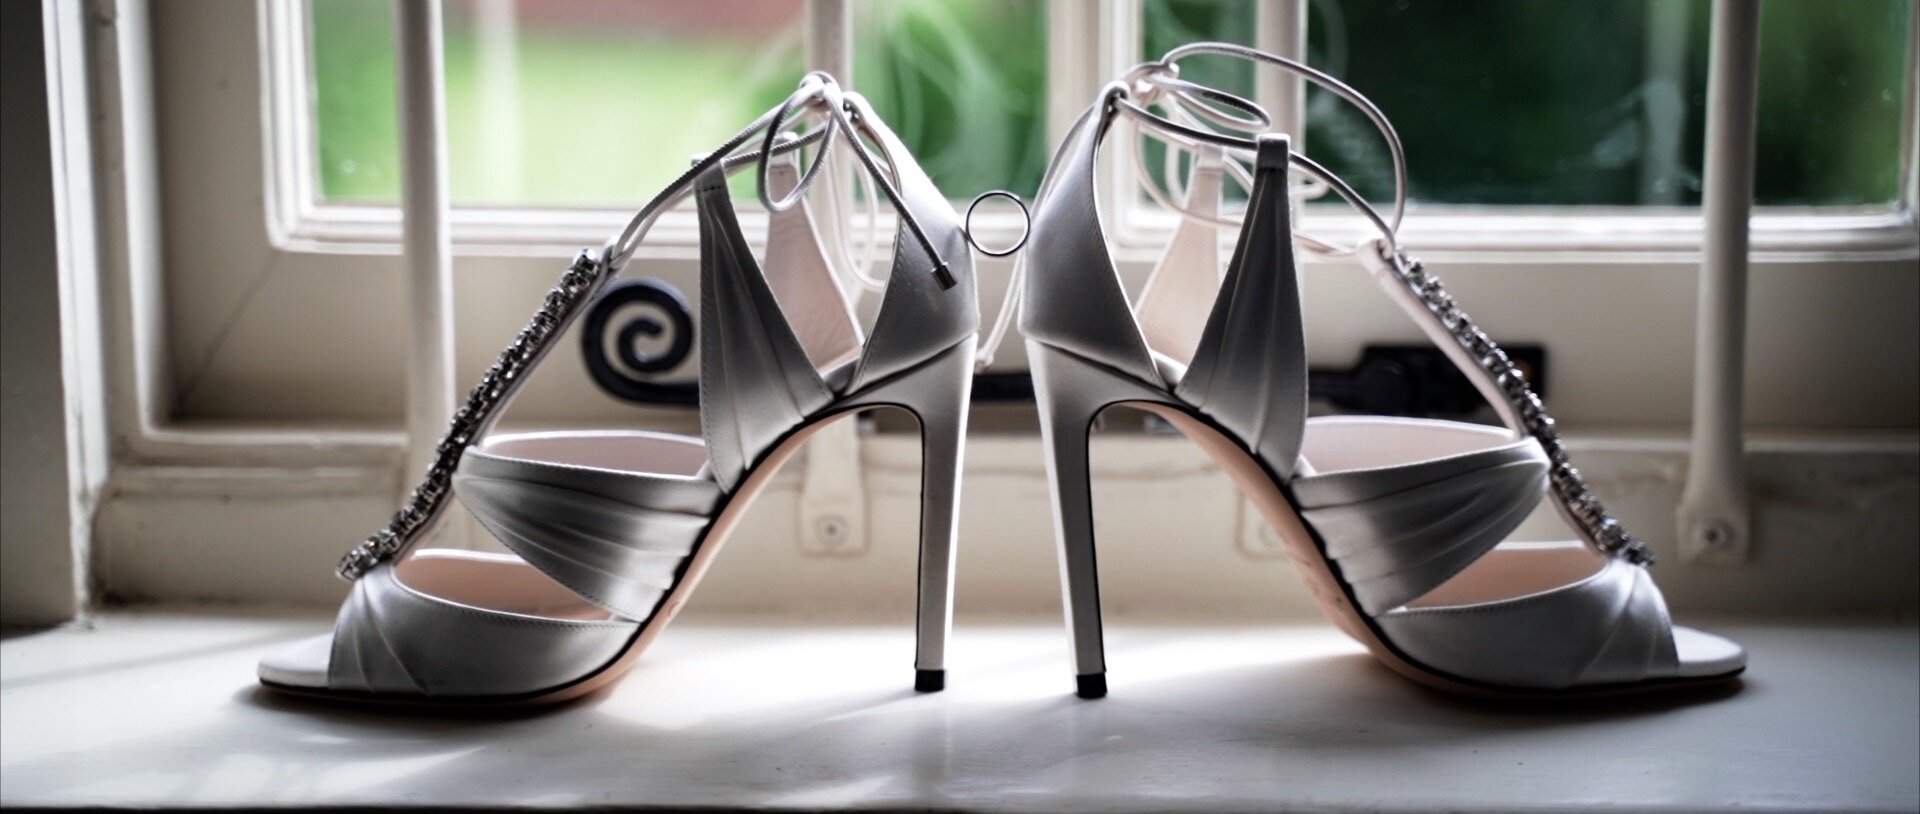 The wedding shoes at quendon hall Essex.jpg